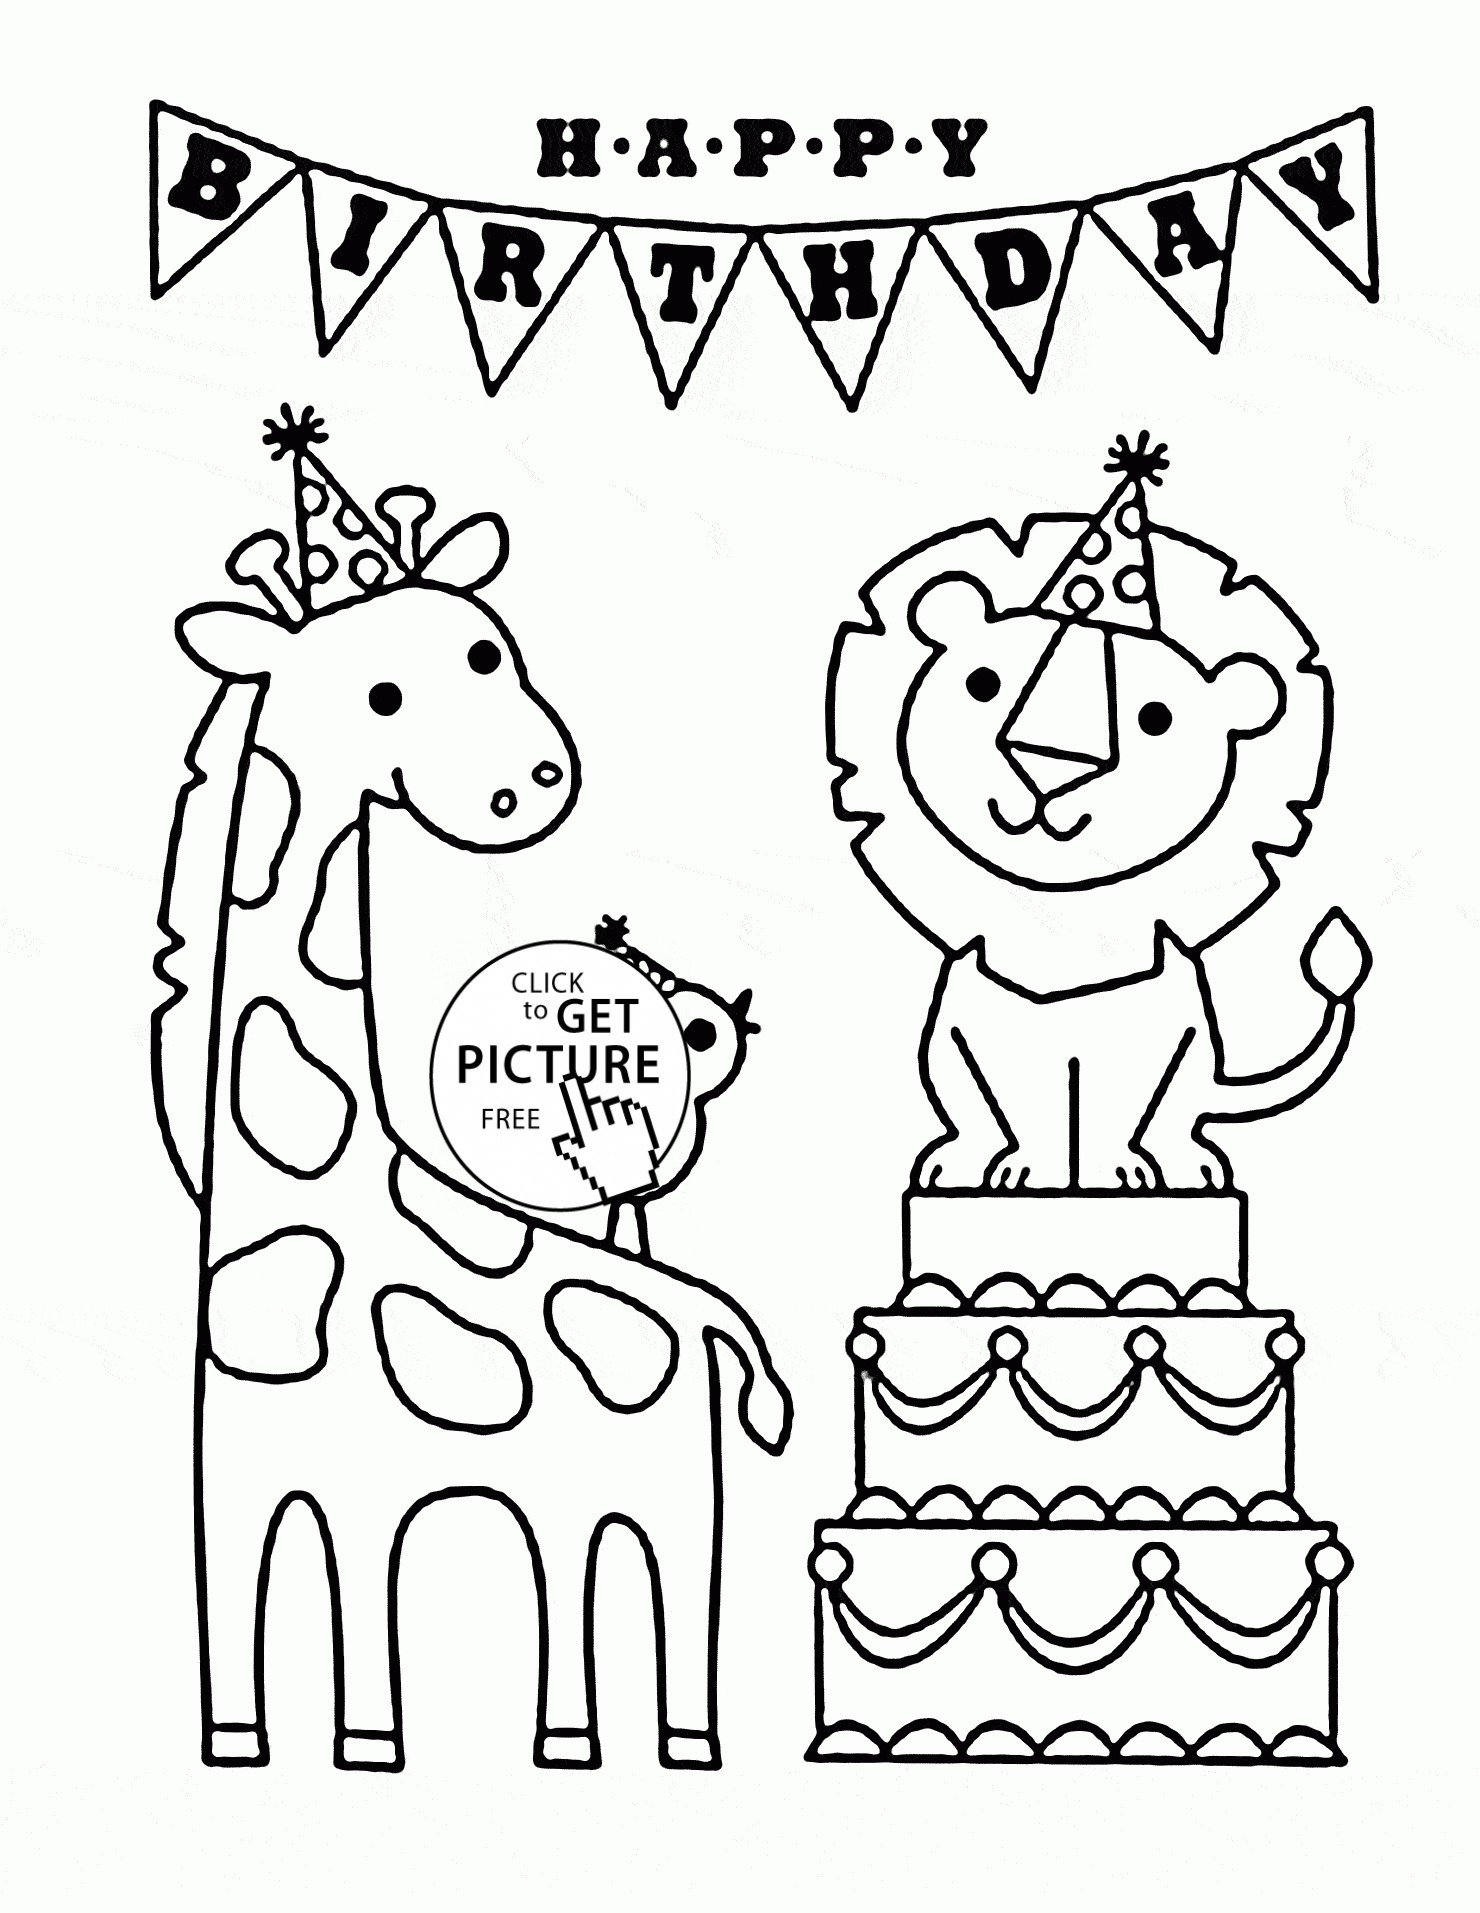 Happy Birthday and Funny Animals coloring page for kids holiday coloring pages printables free Wuppsy